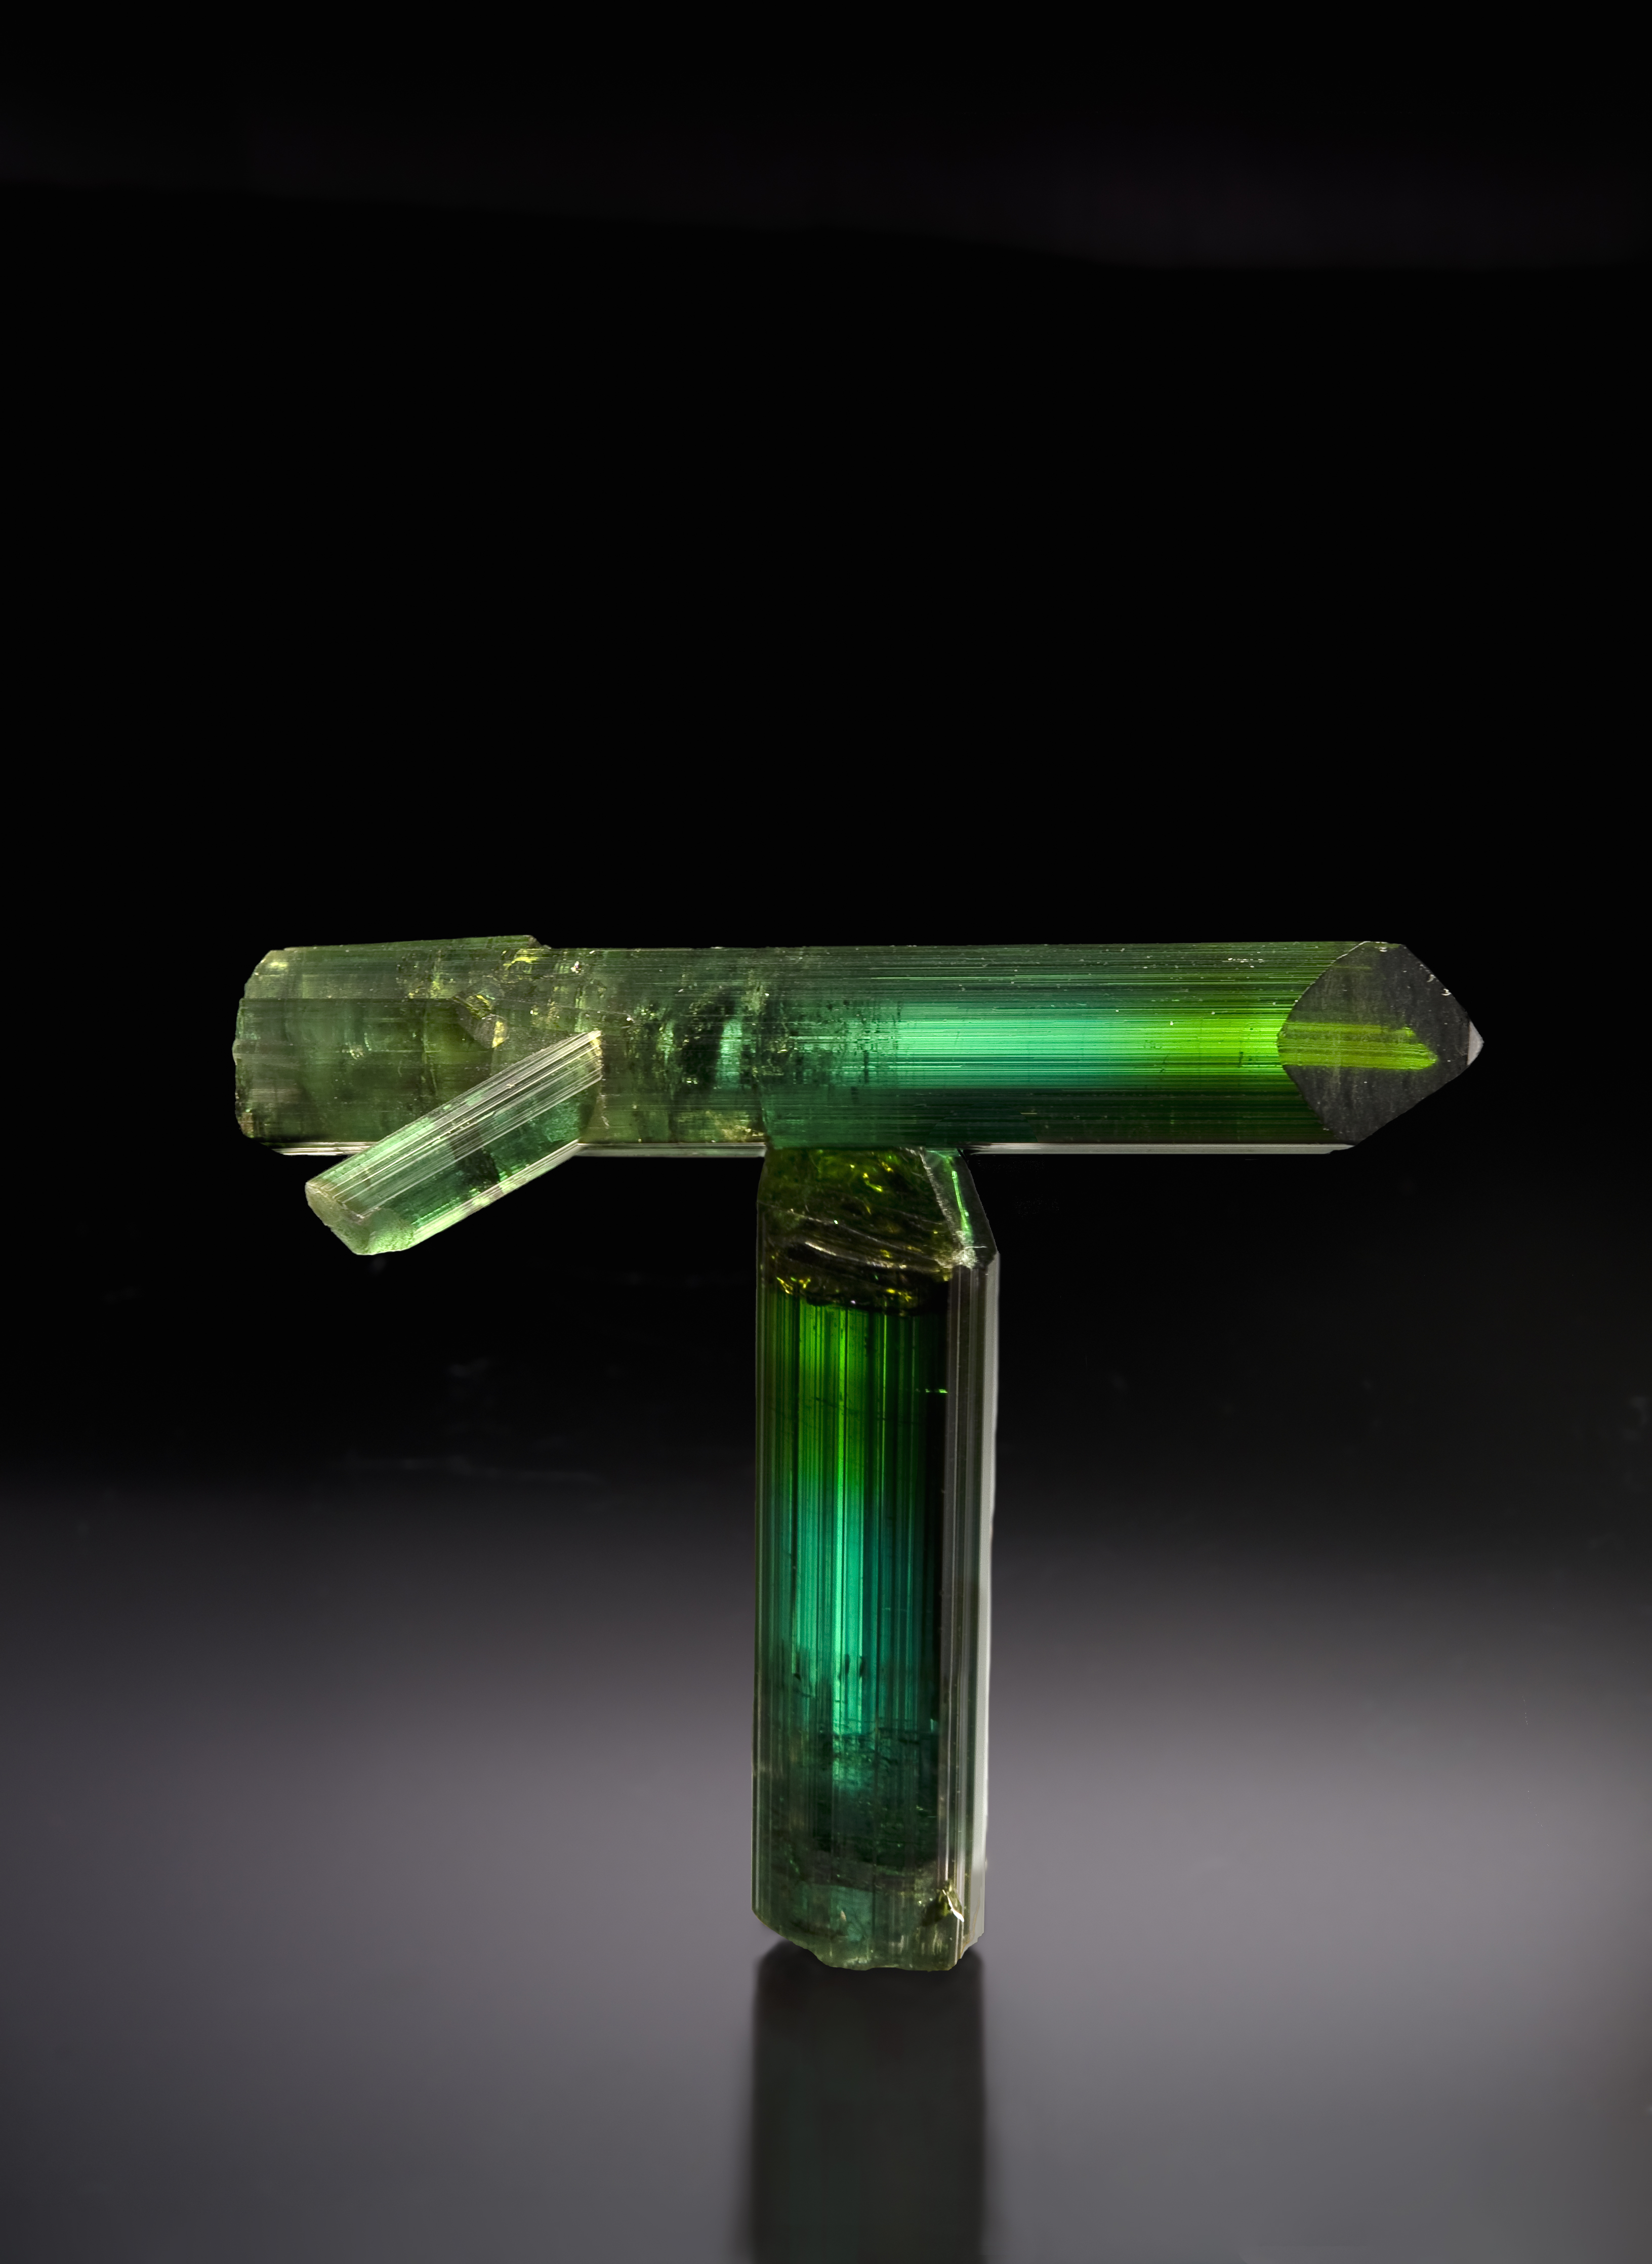 Two kelly green rounded tourmaline crystals form a capital T on a gray background. They are lit from above and reflect on the gray surface. The top crystal has a small adjoining crystal that makes it appear as if it is a rocket, about to take off to the right of the frame. 